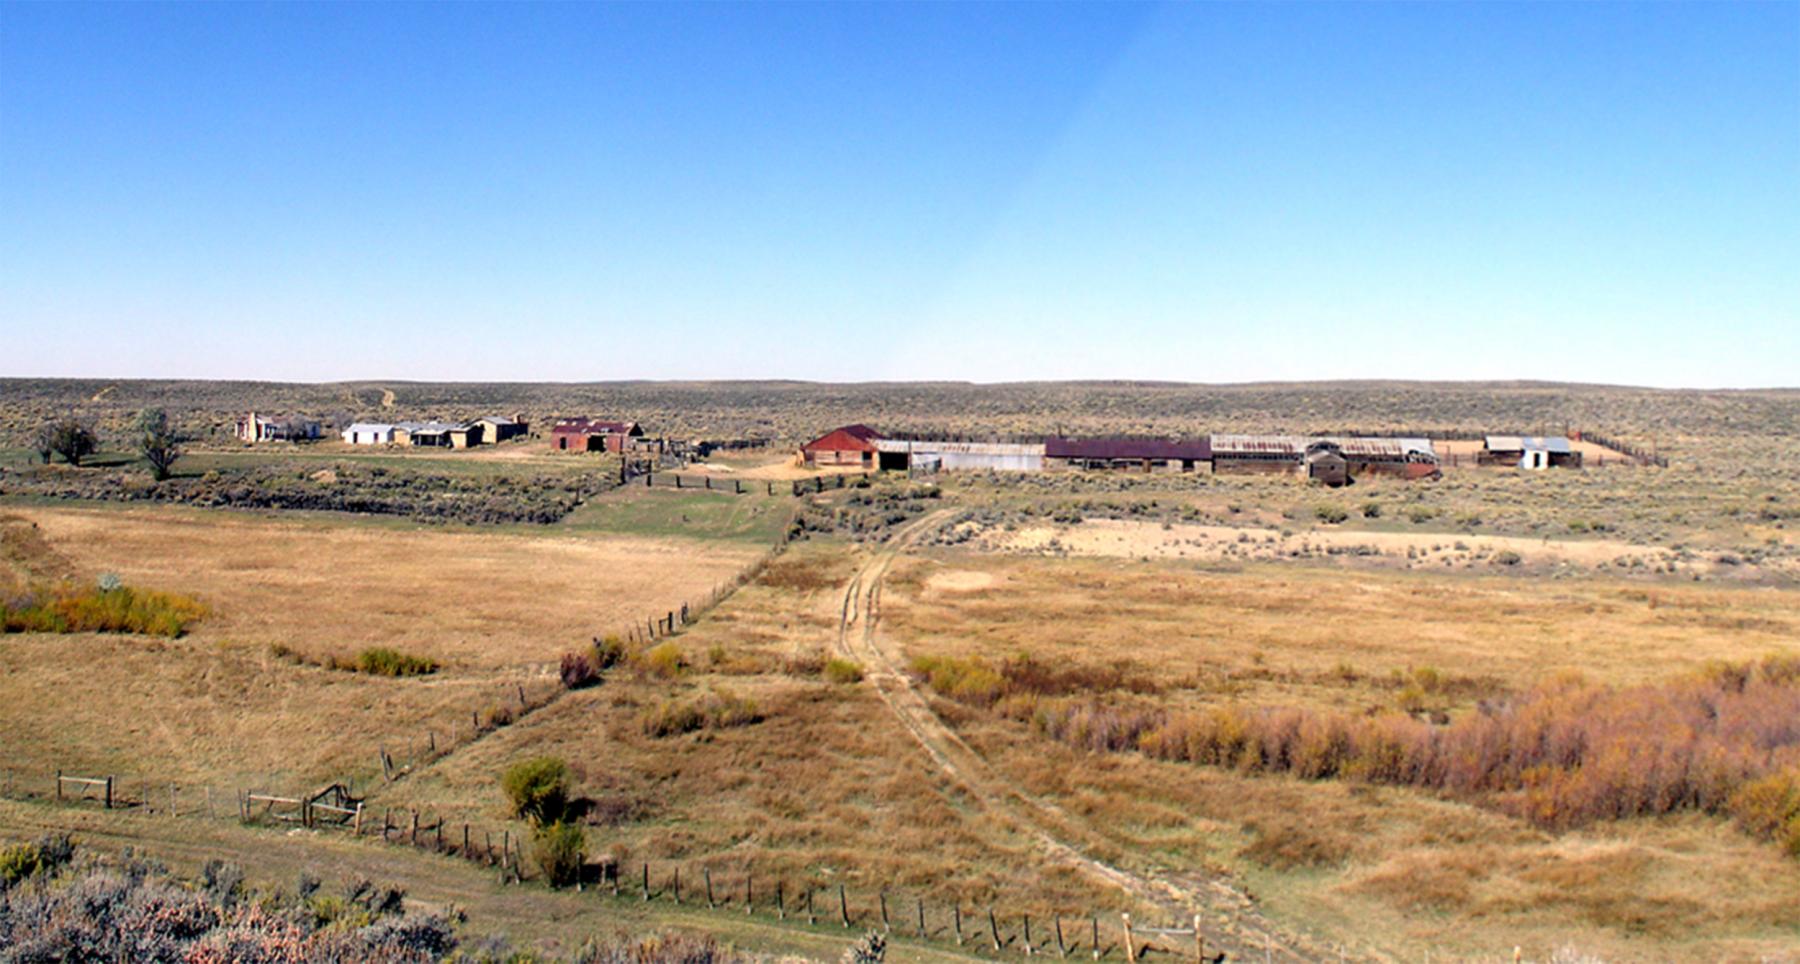 An overview of the J O Ranch, founded by Joe Rankin in 1885. It became an important site on the Rawlins to Baggs Wagon Road in the 1890s and early 1900s. The site remained an active cattle and sheep operation until recently when it was obtained by the US Bureau of Land Management in a land exchange. Rawlins Field Office, Bureau of Land Management.